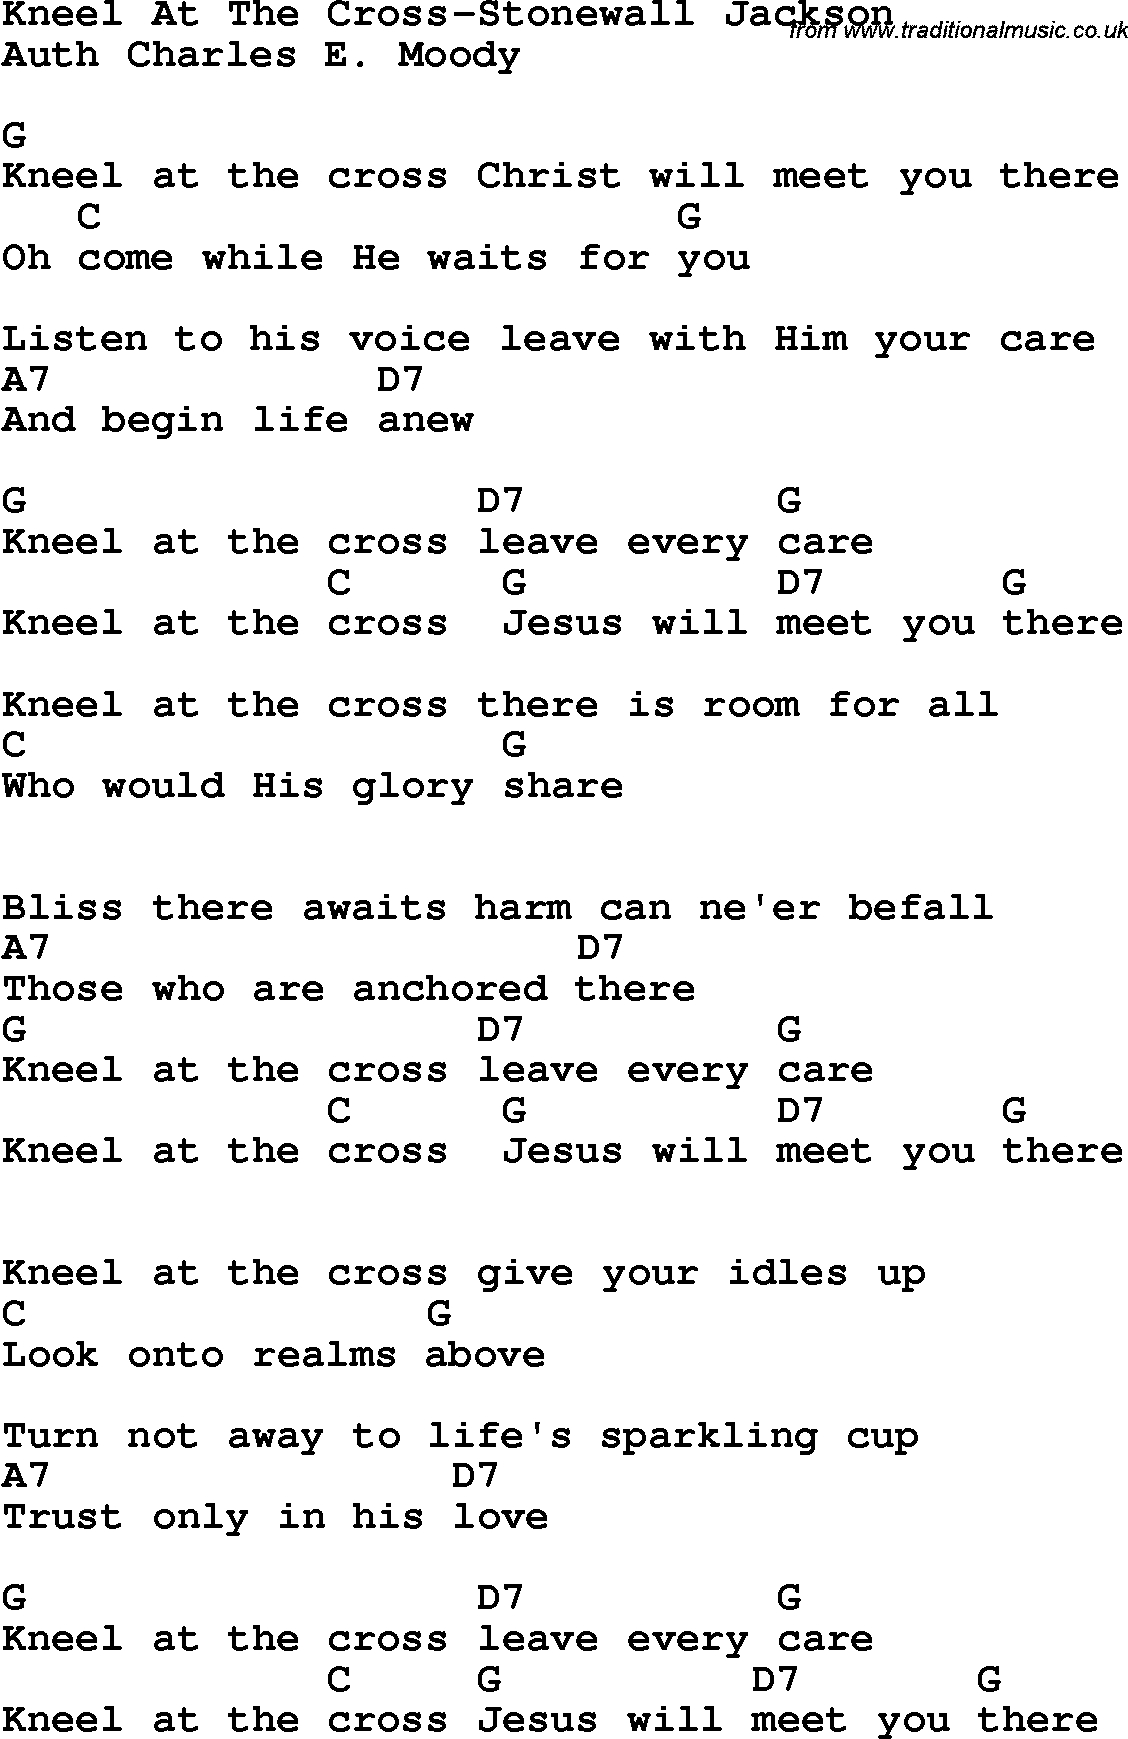 At The Cross Chords Country Southern And Bluegrass Gospel Song Kneel At The Cross